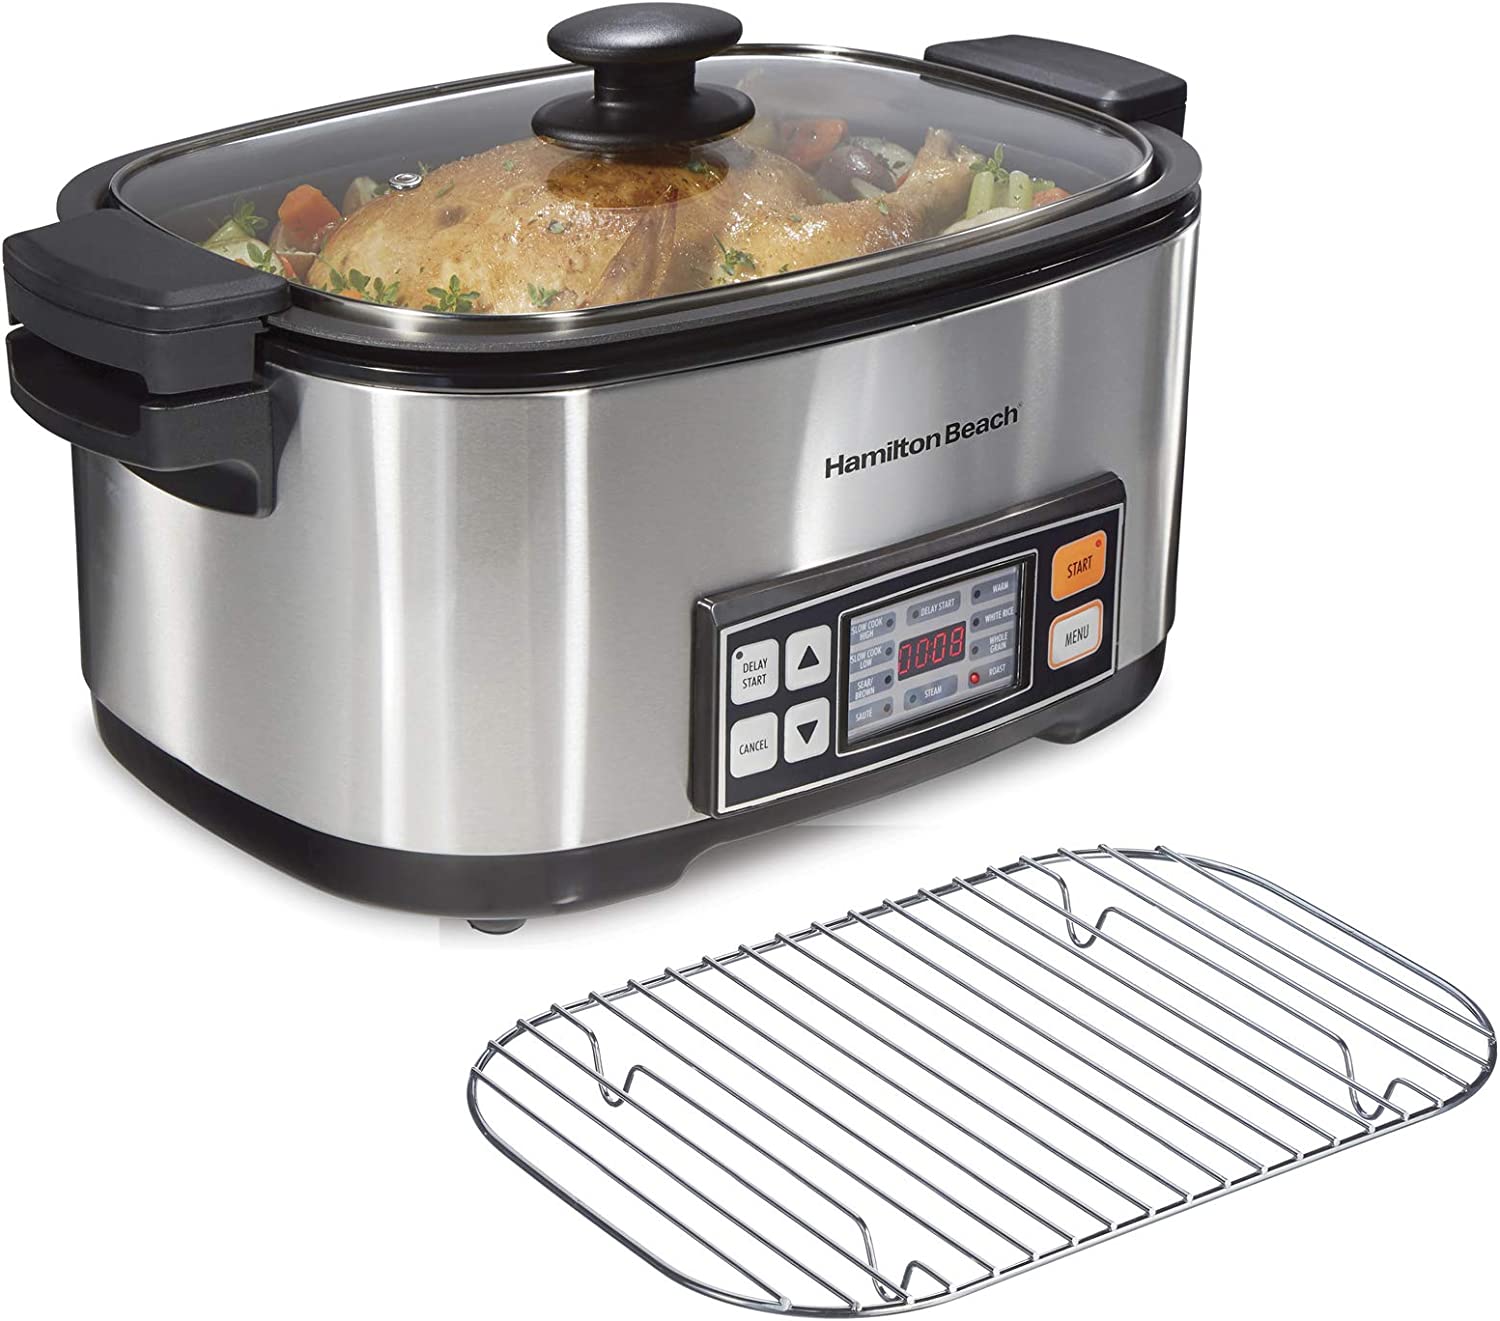 Hamilton Beach 9-in-1 Digital Programmable Slow Cooker with 6